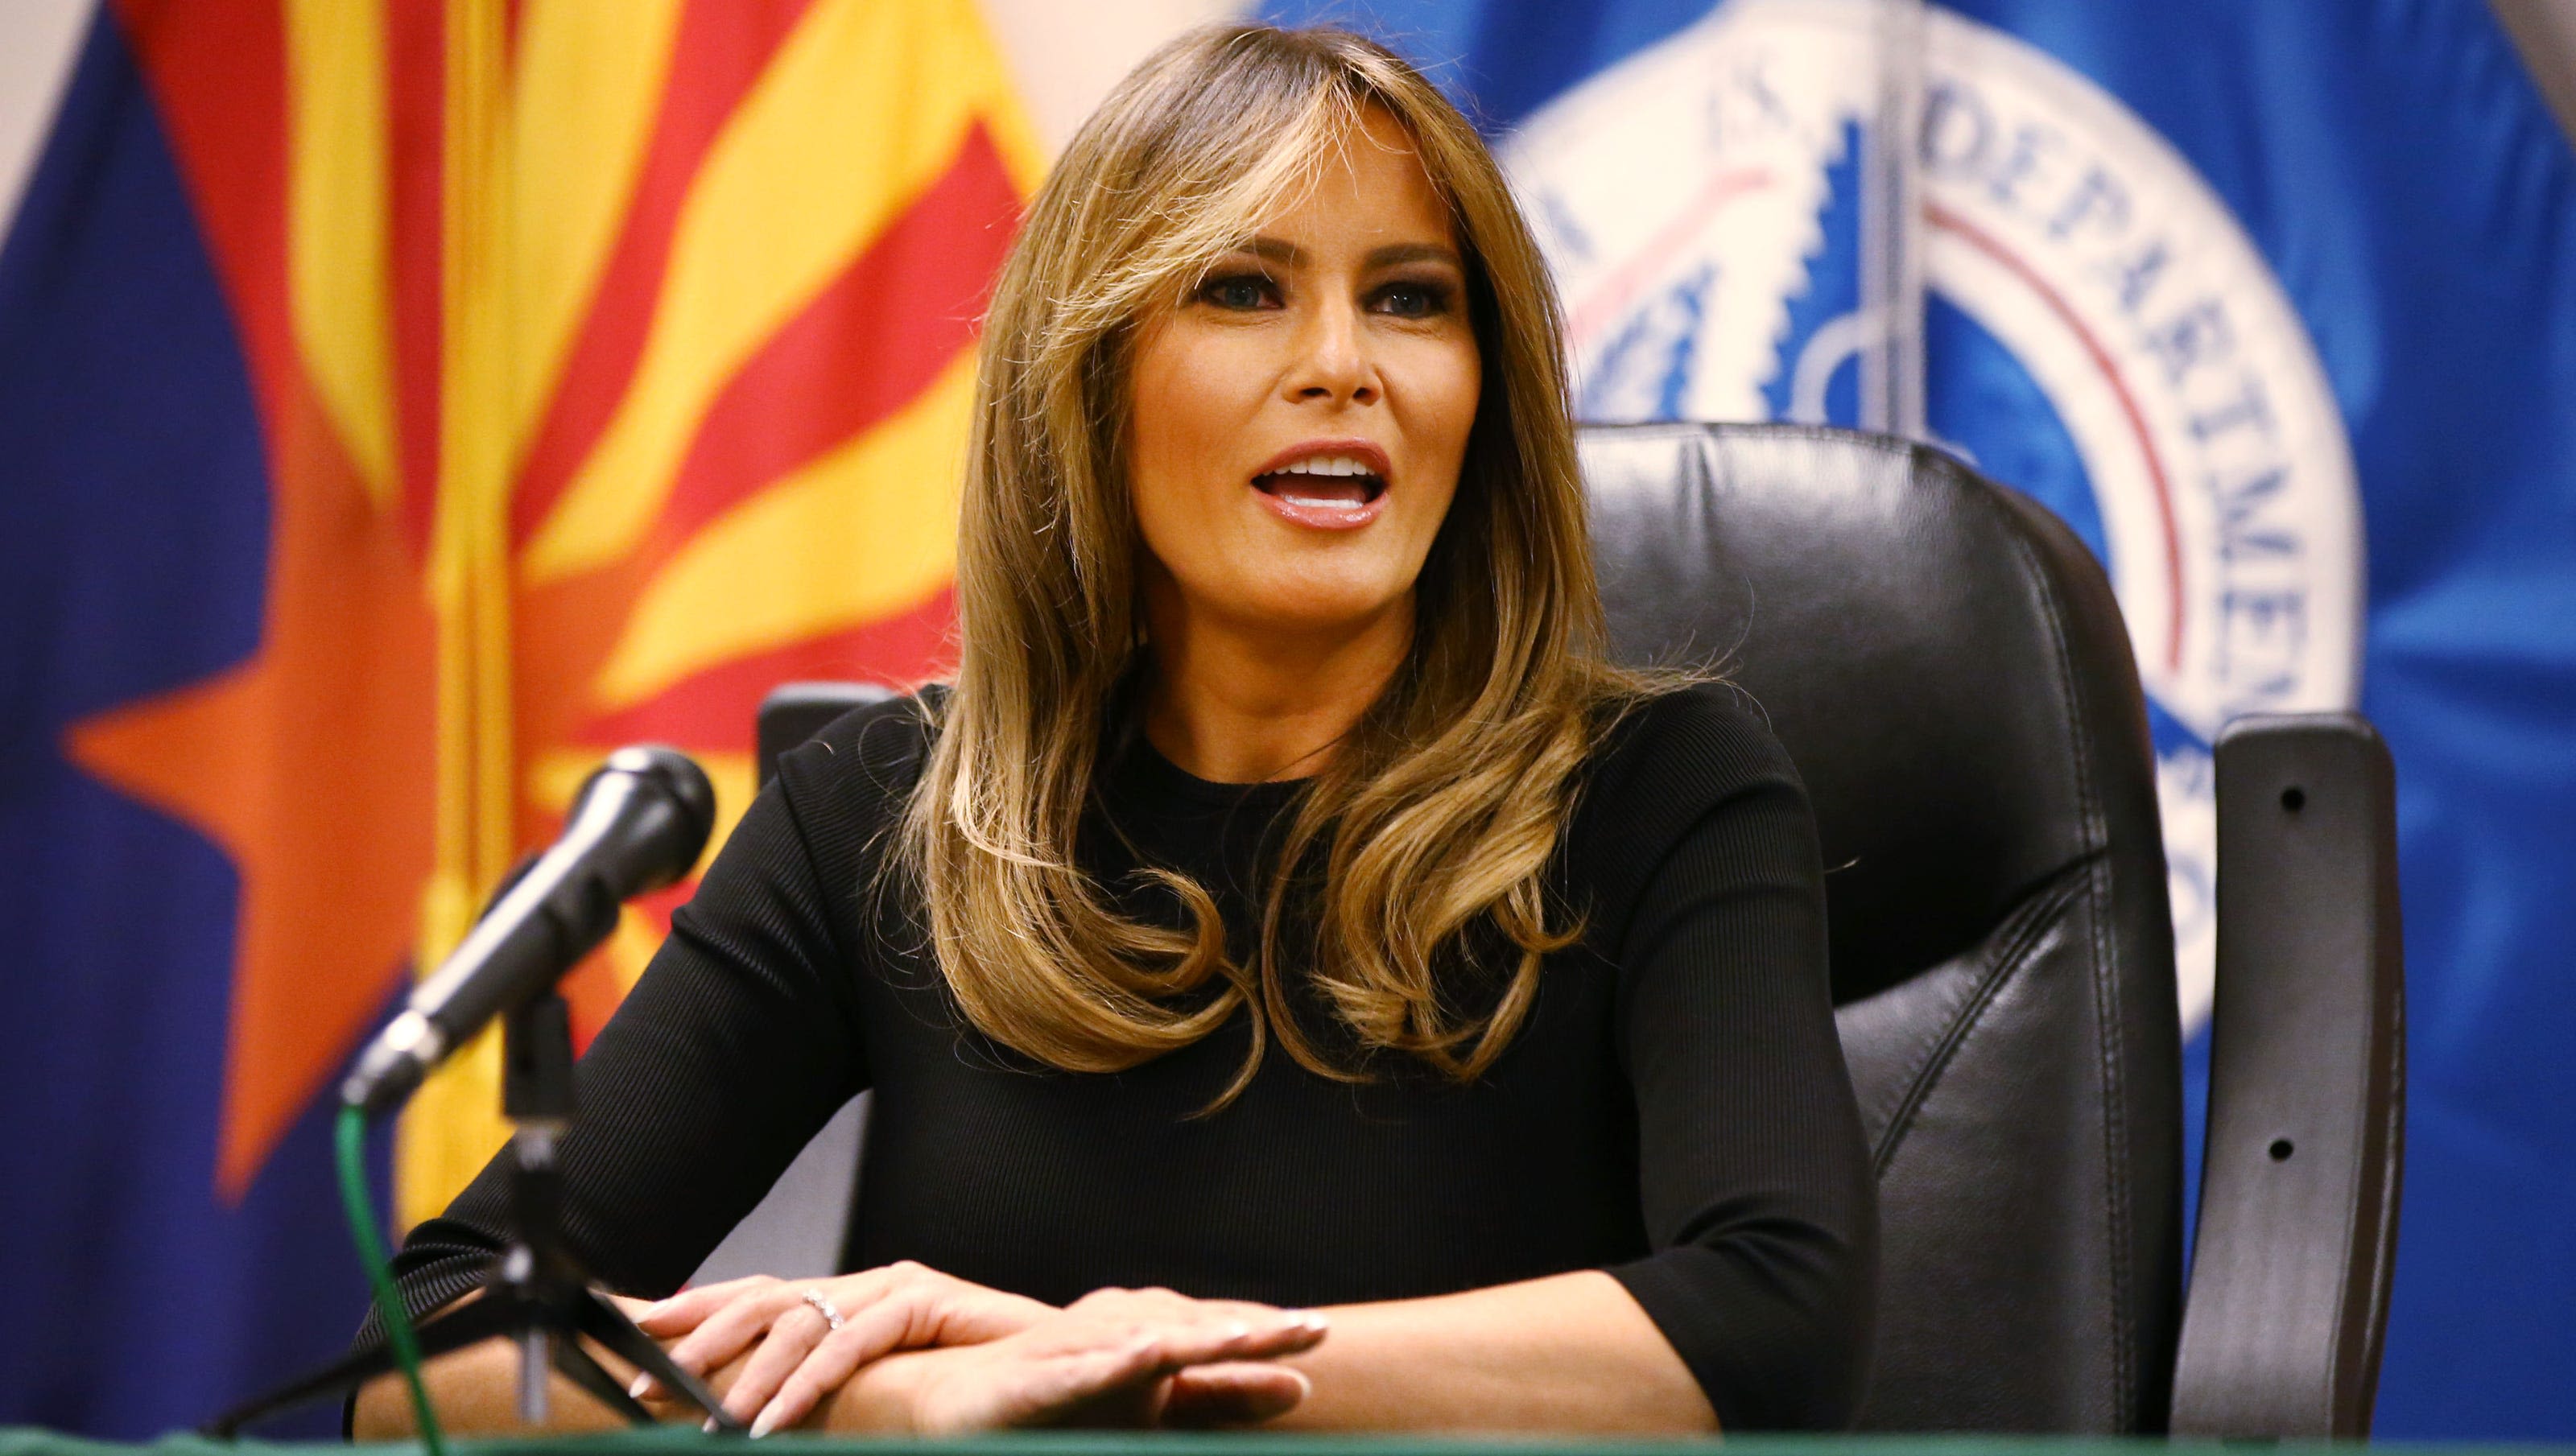 Former first lady Melania Trump won't speak at RNC. When was she last in Arizona?